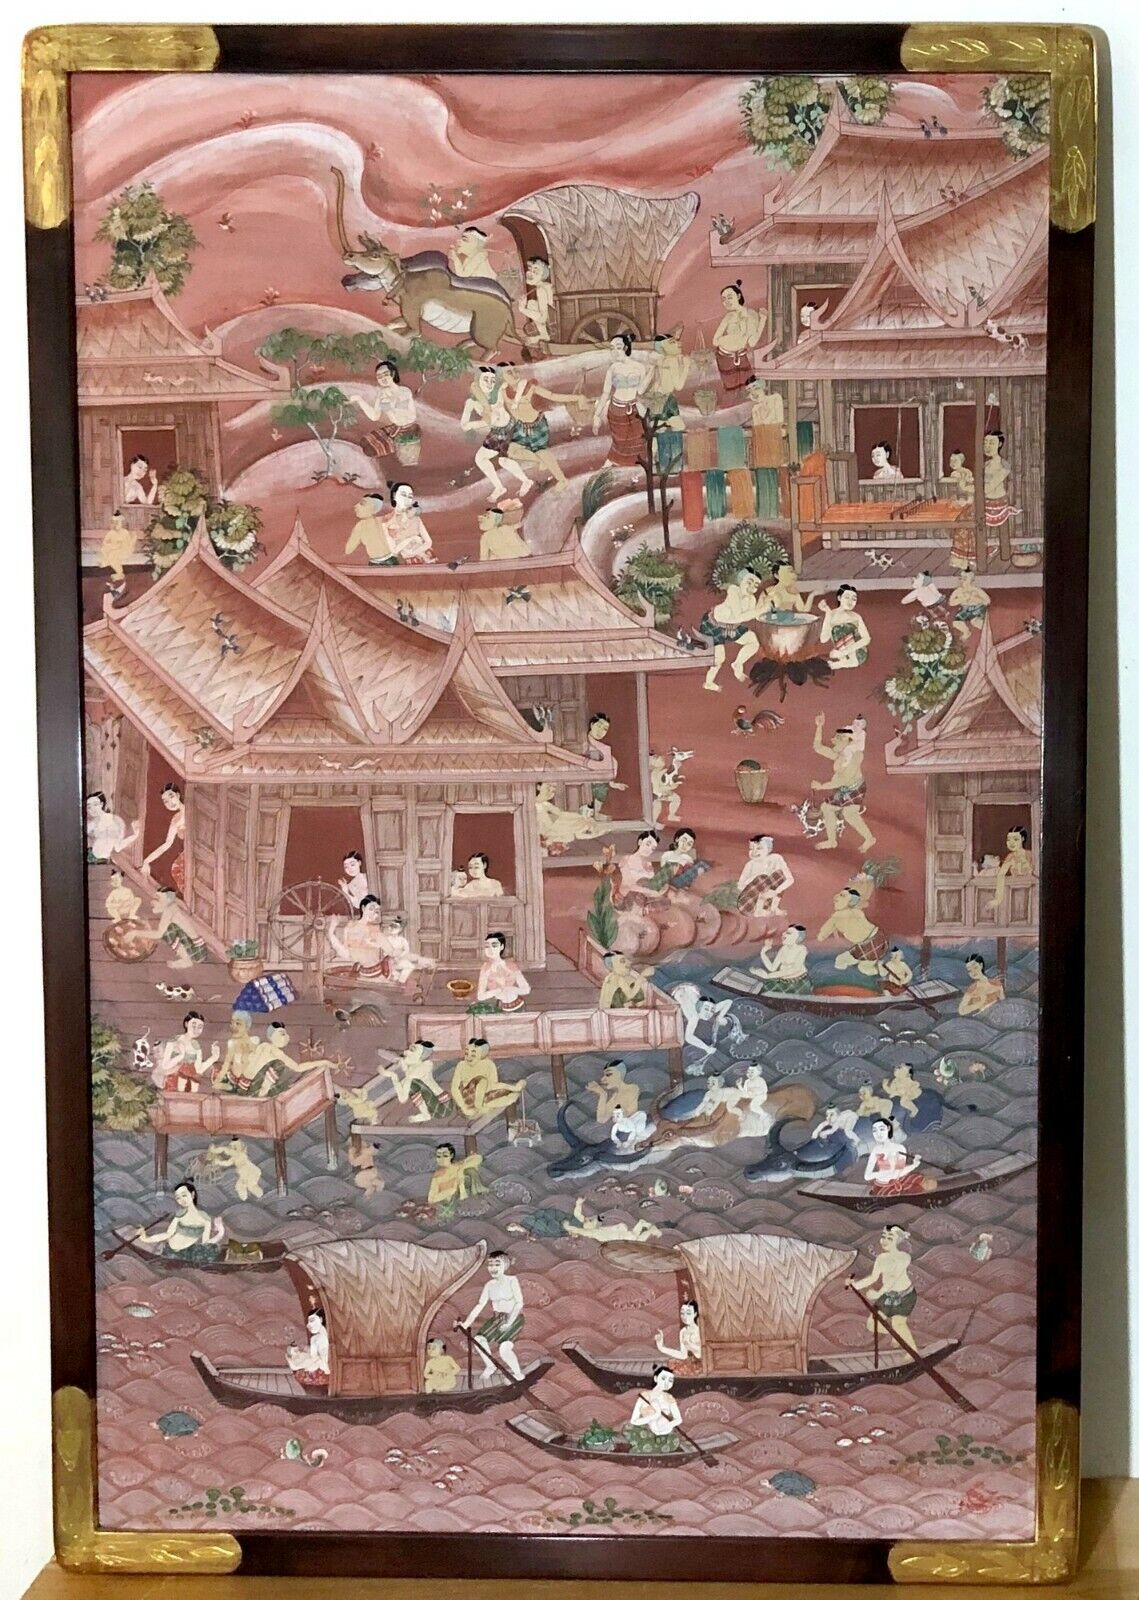 BEAUTIFUL FRAMED LARGE PERSIAN WATERCOLOR PAINTING OF VILLAGE WITH FIGURES